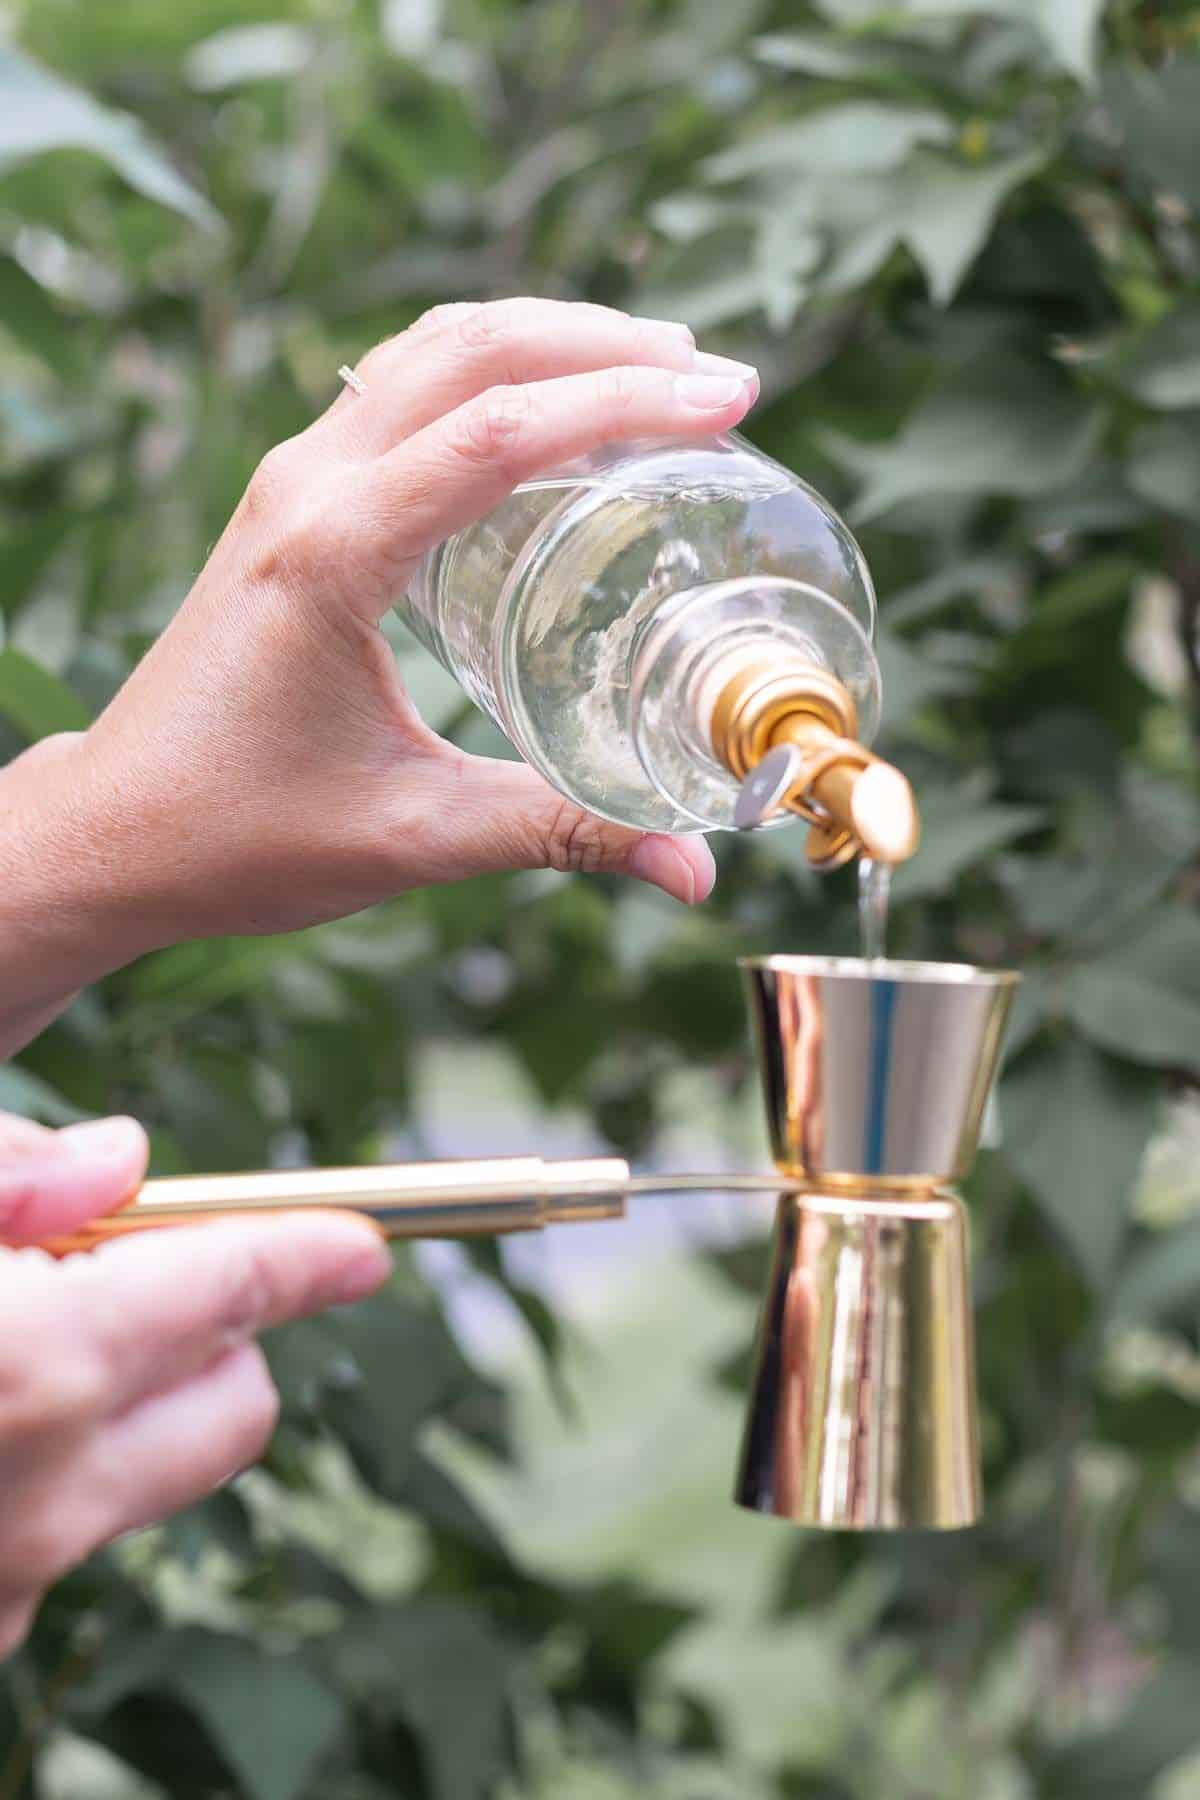 A hand pouring a glass bottle full of mixer into a copper shot measurer.